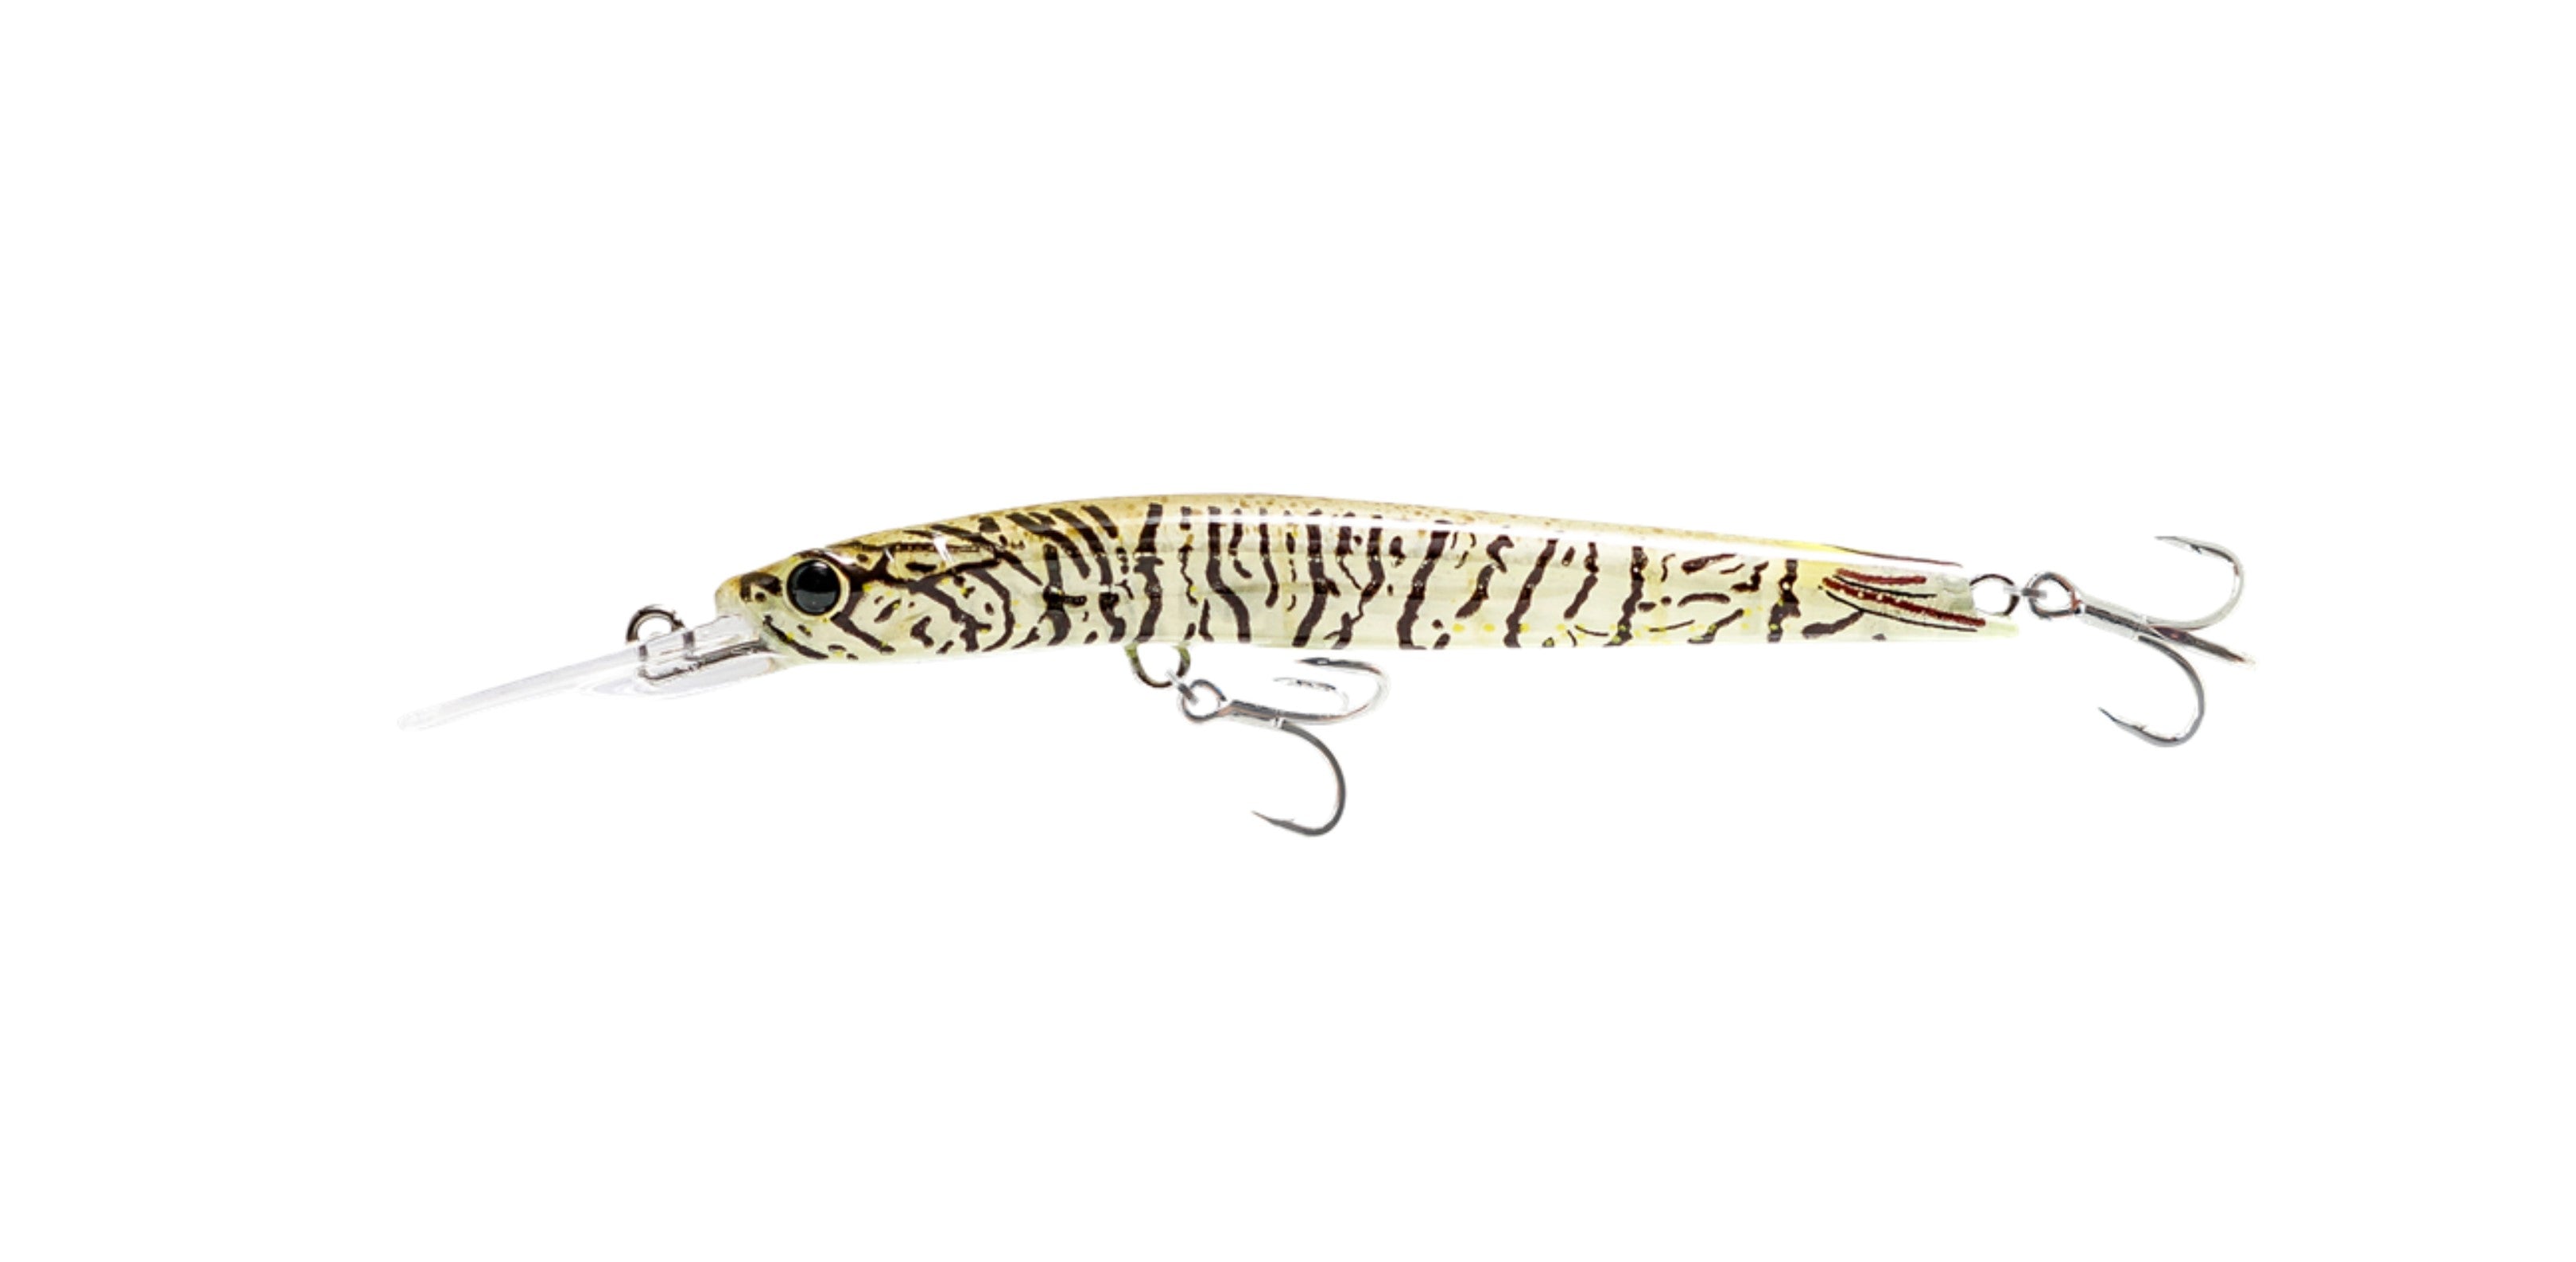 Nomad Design Styx Minnow 70mm Suspending - Brown Sand Shrimp – Trophy Trout  Lures and Fly Fishing